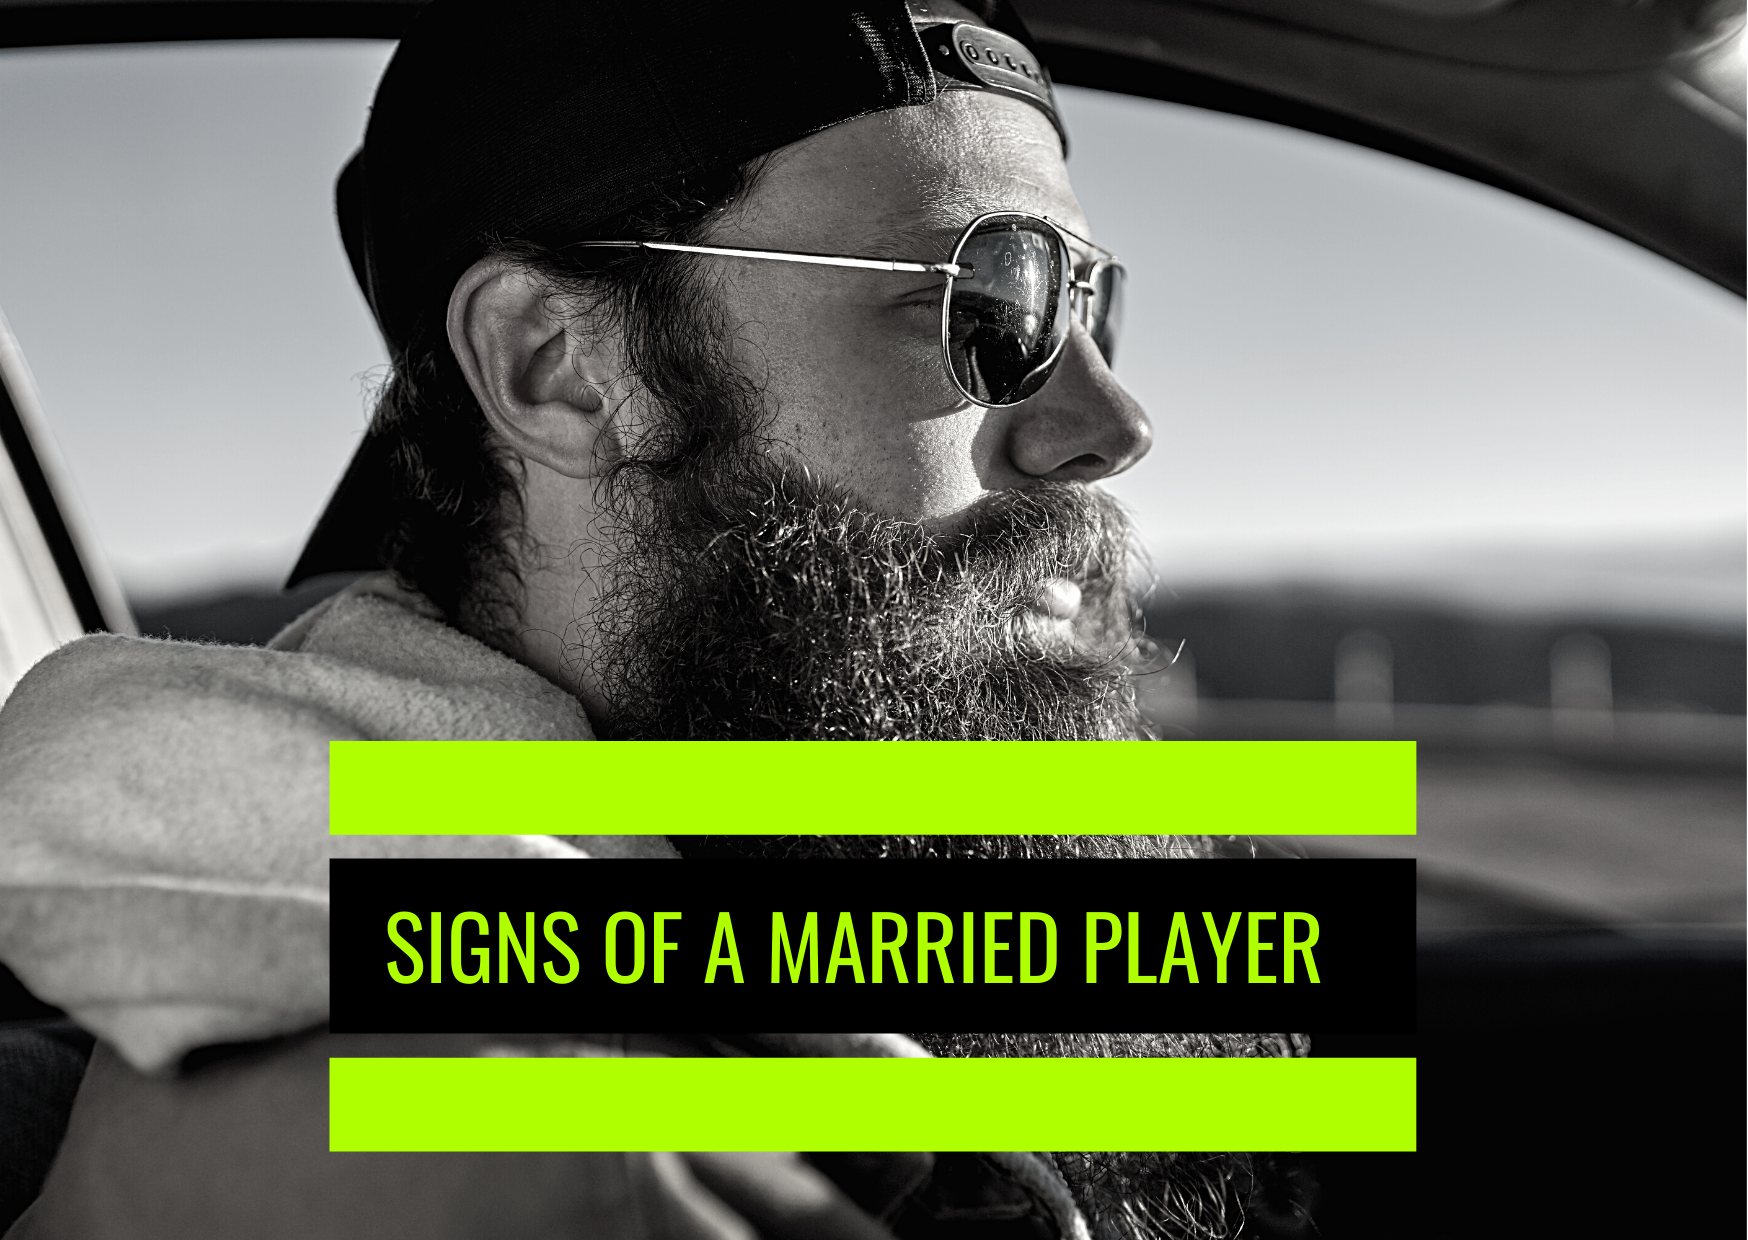 Signs of a married player